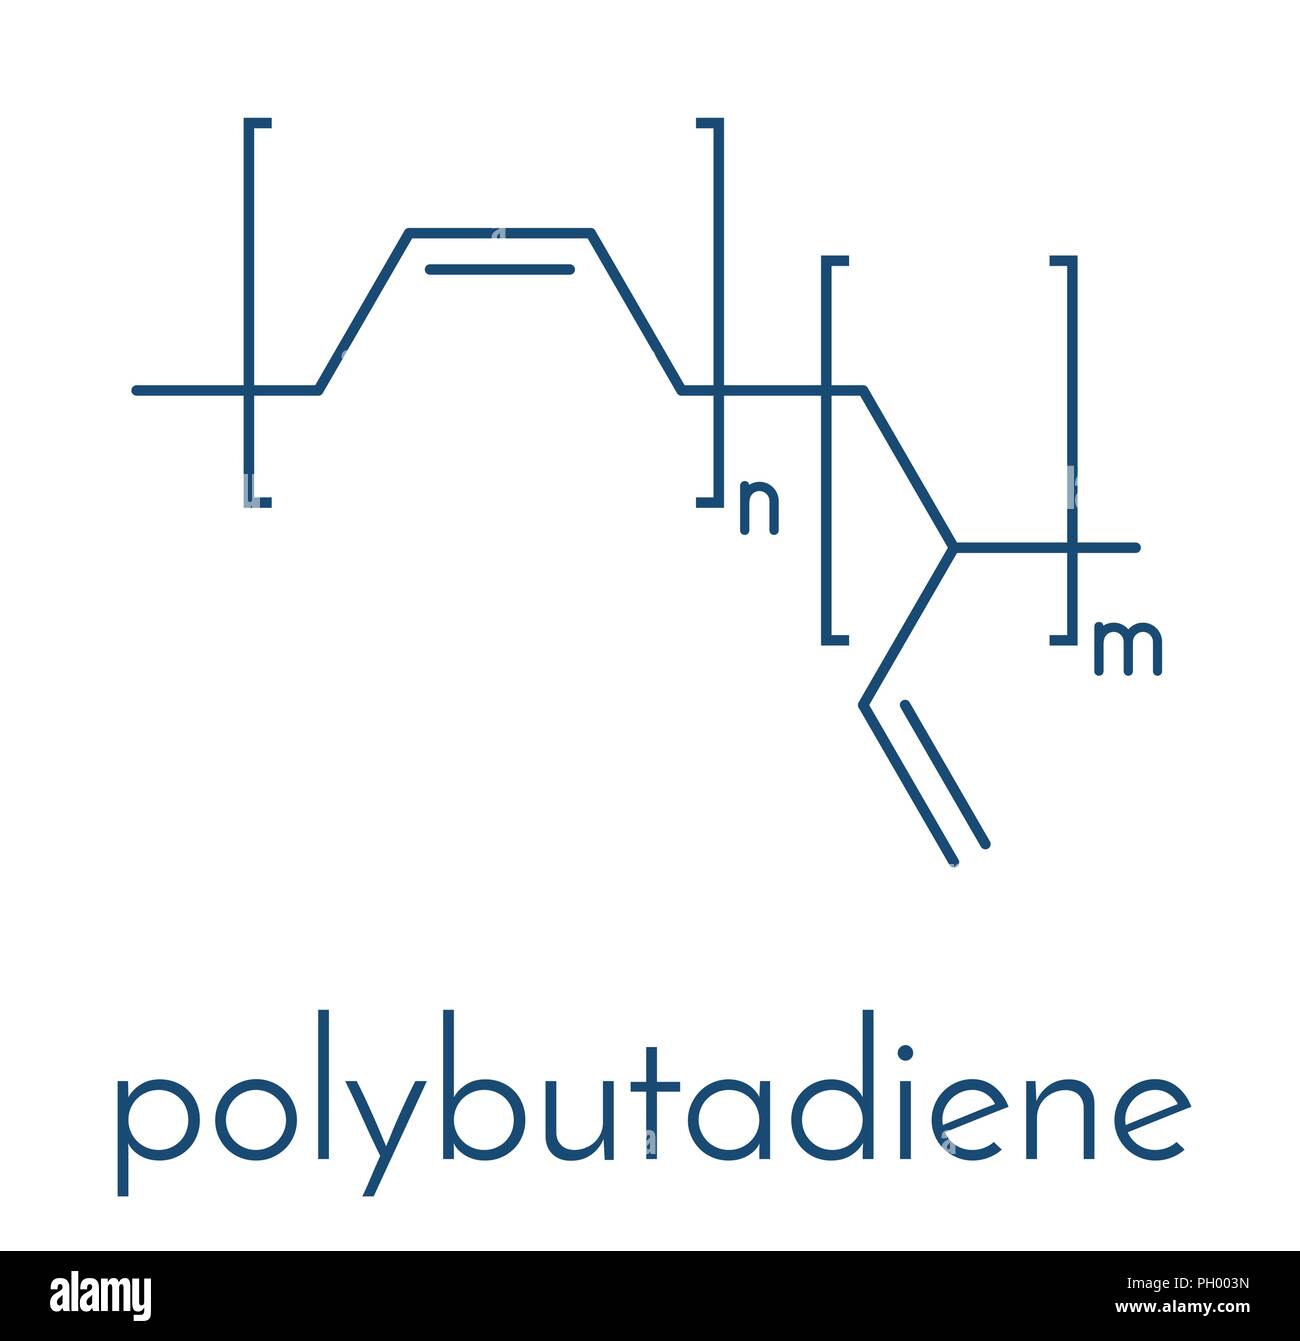 Polybutadiene (butadiene rubber) polymer, chemical structure. Used in manufacture of tires, golf balls, etc. Skeletal formula. Stock Vector